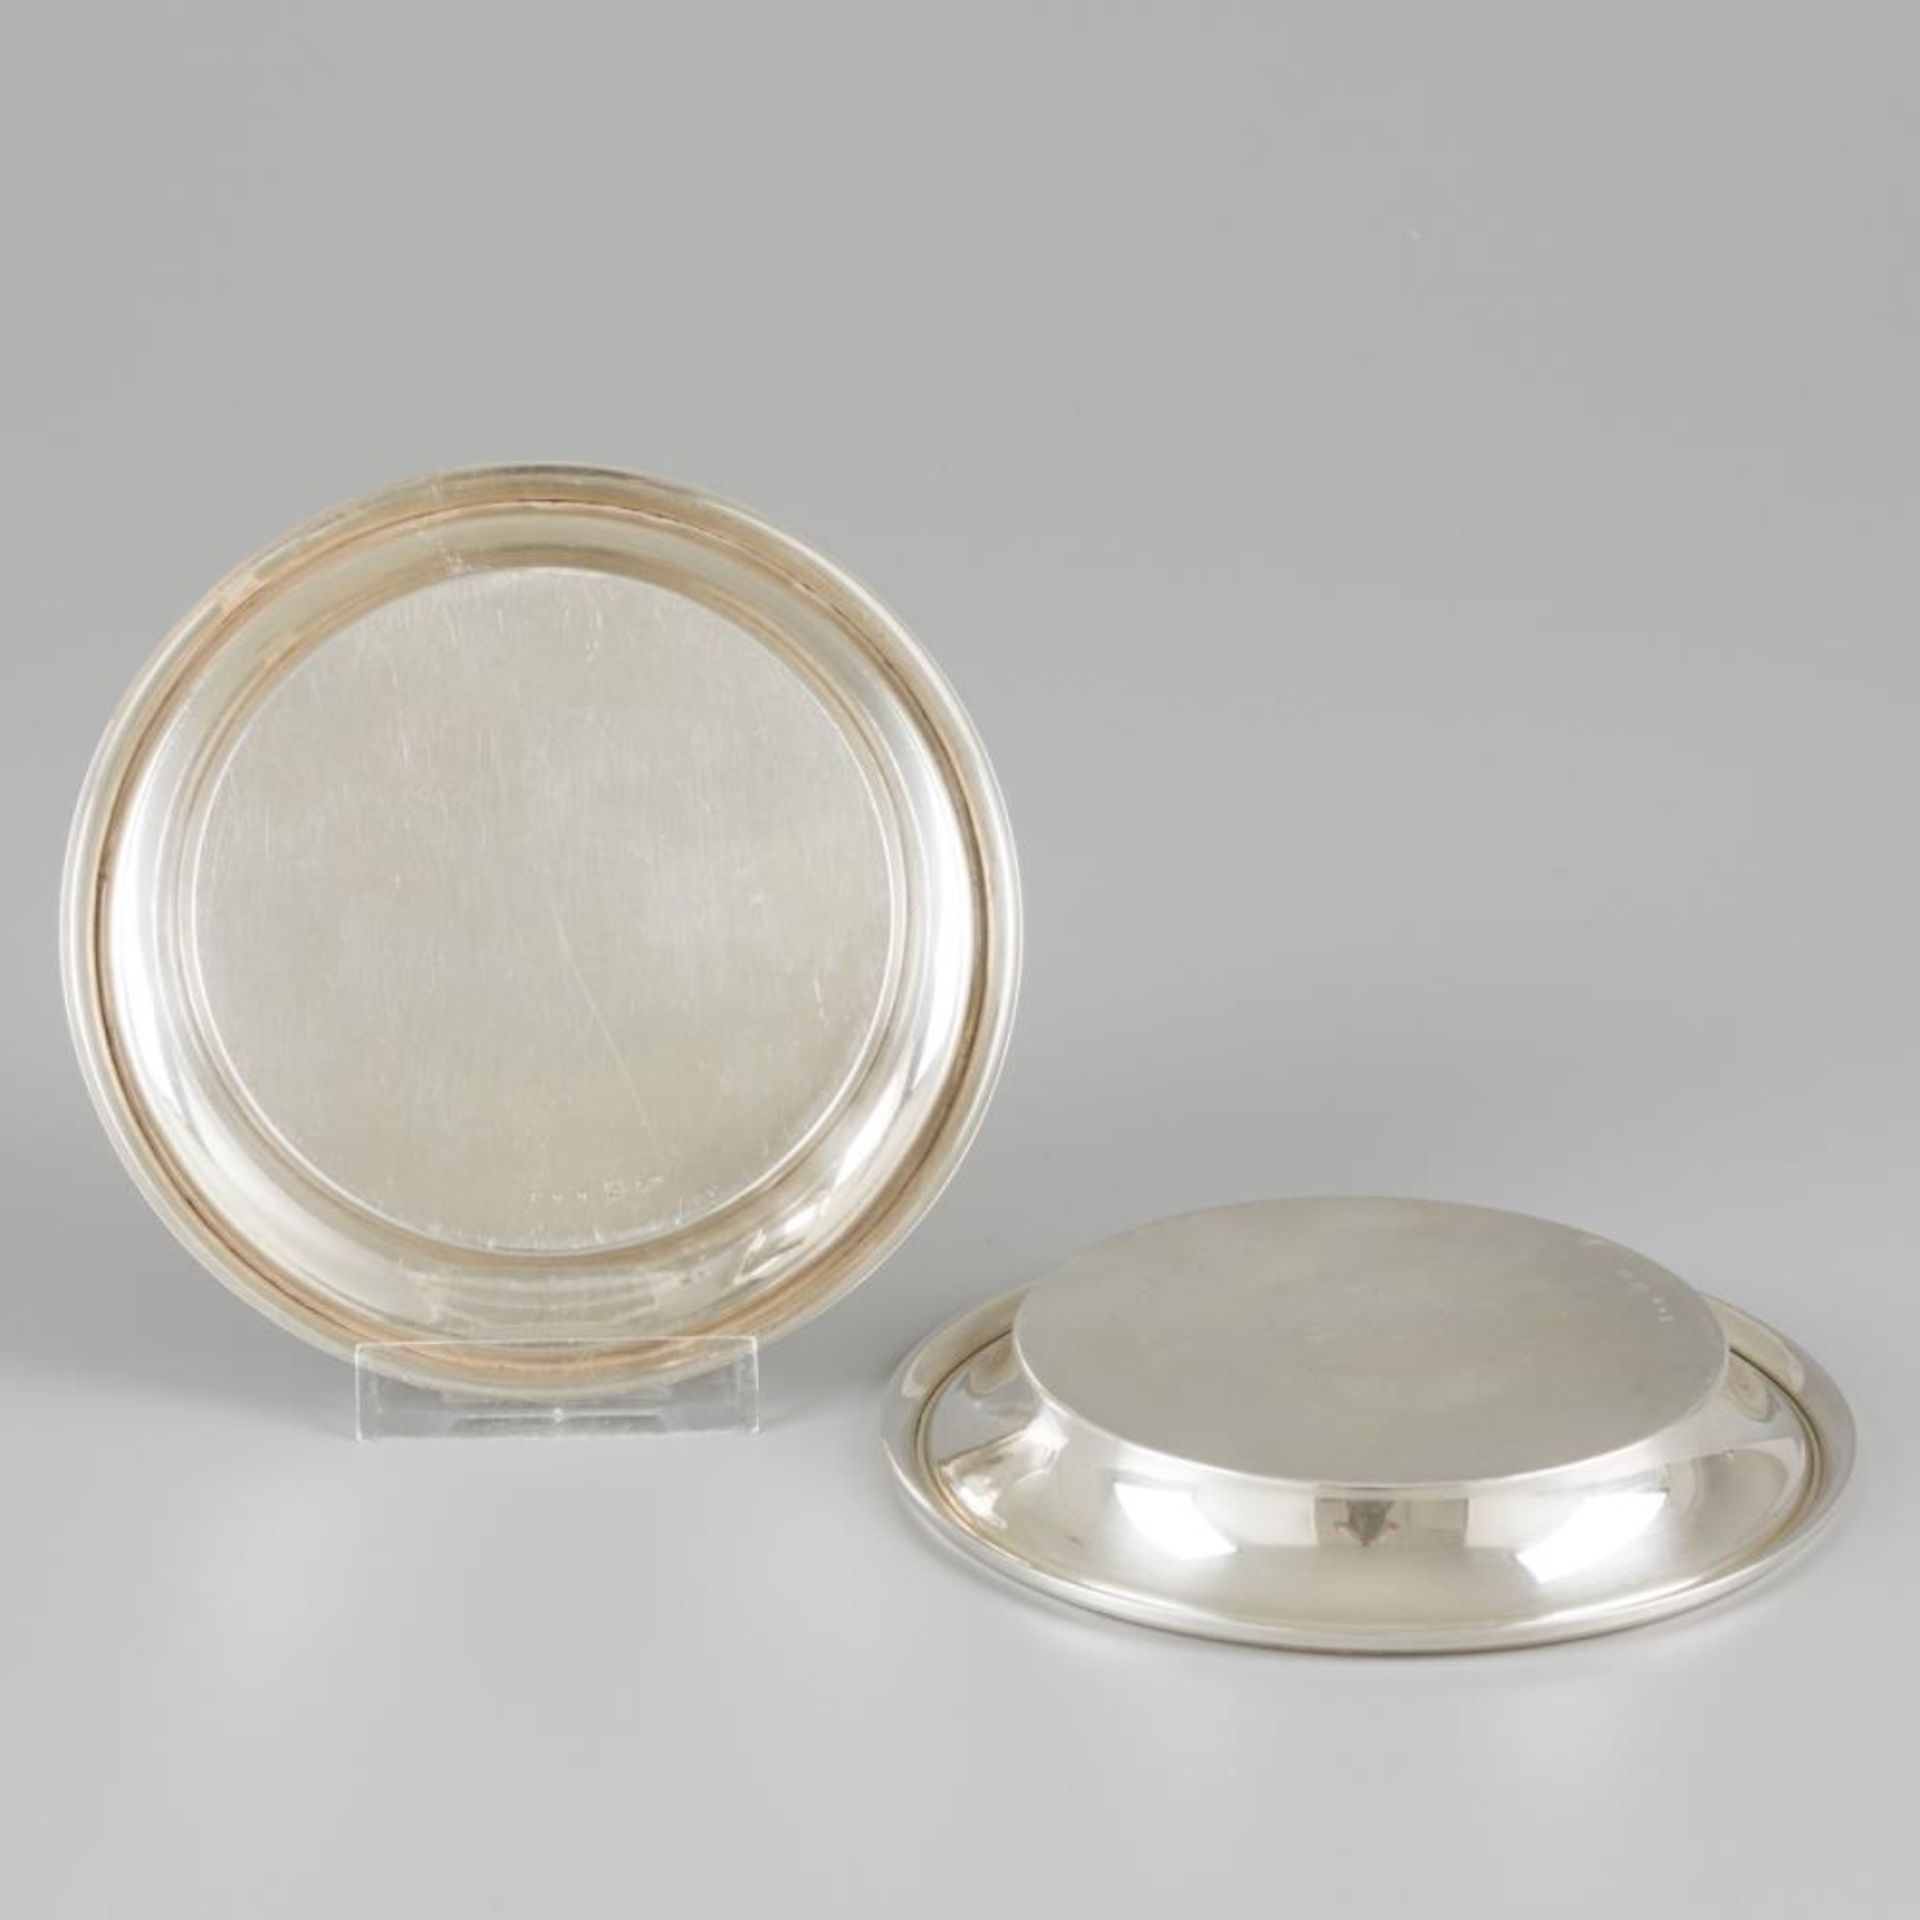 2-piece set of bottle trays silver. - Image 2 of 5